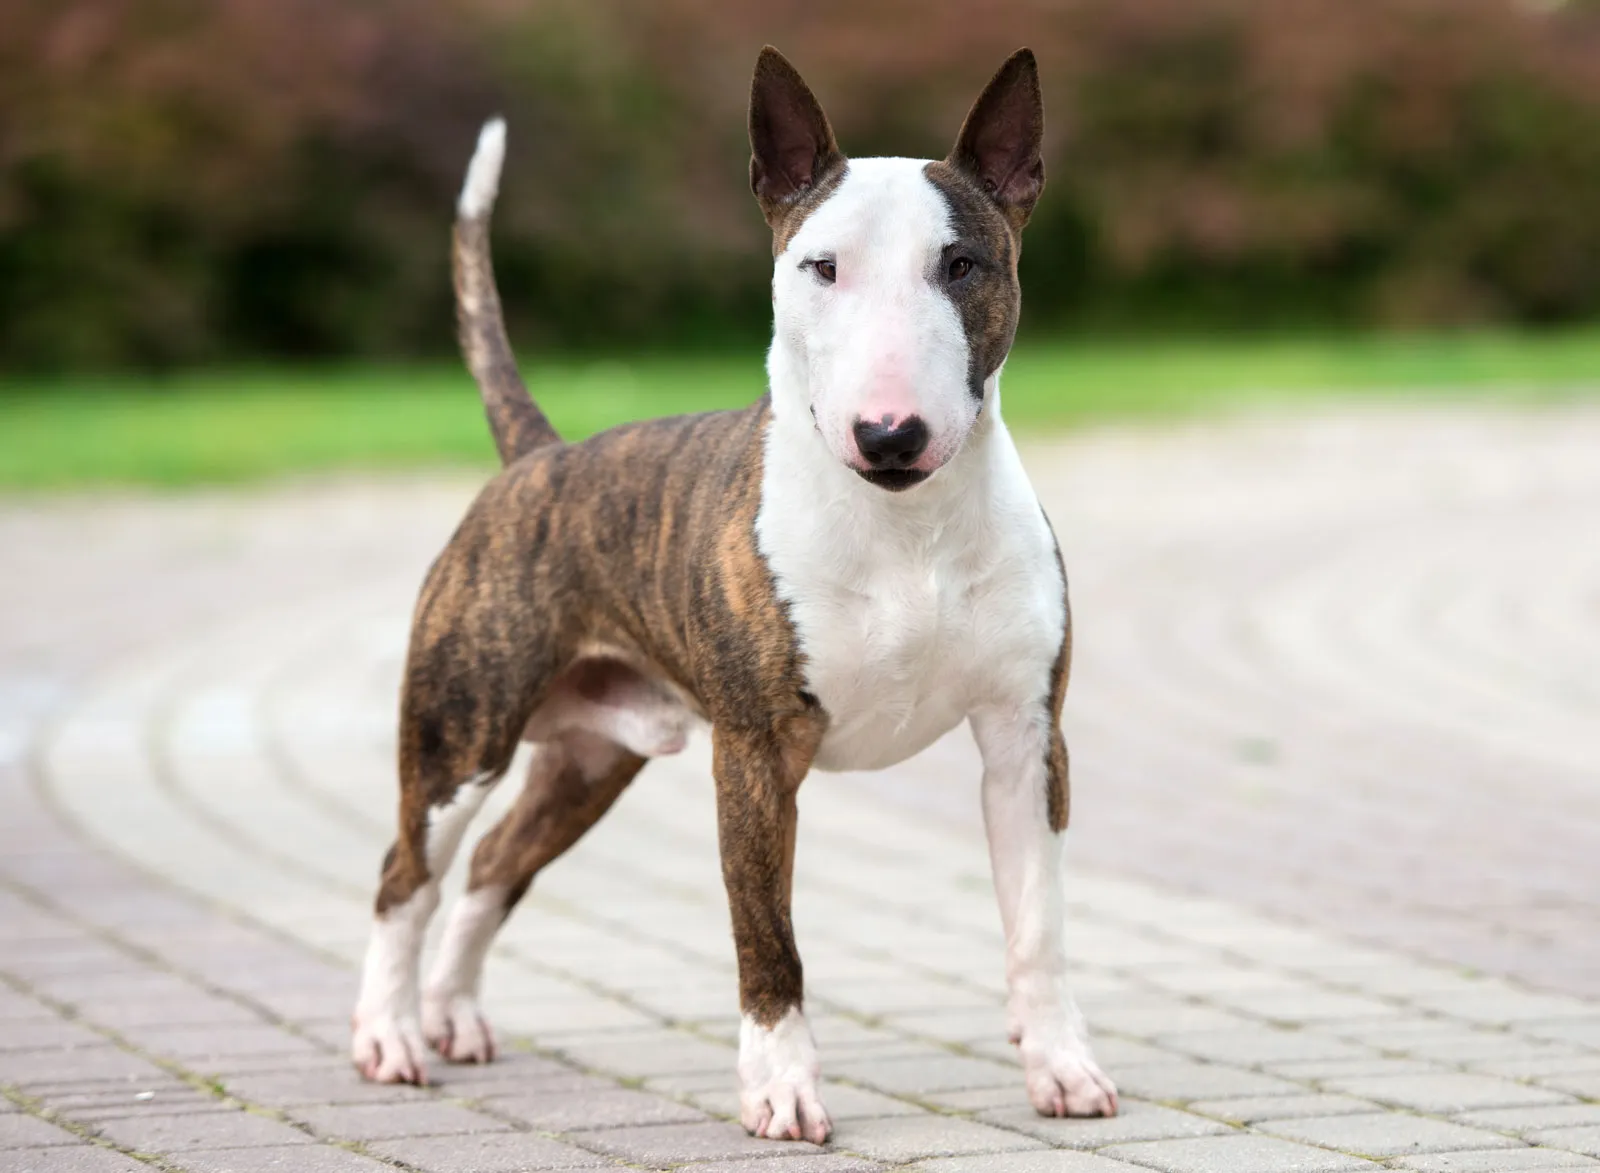 Bull Terrier featured image